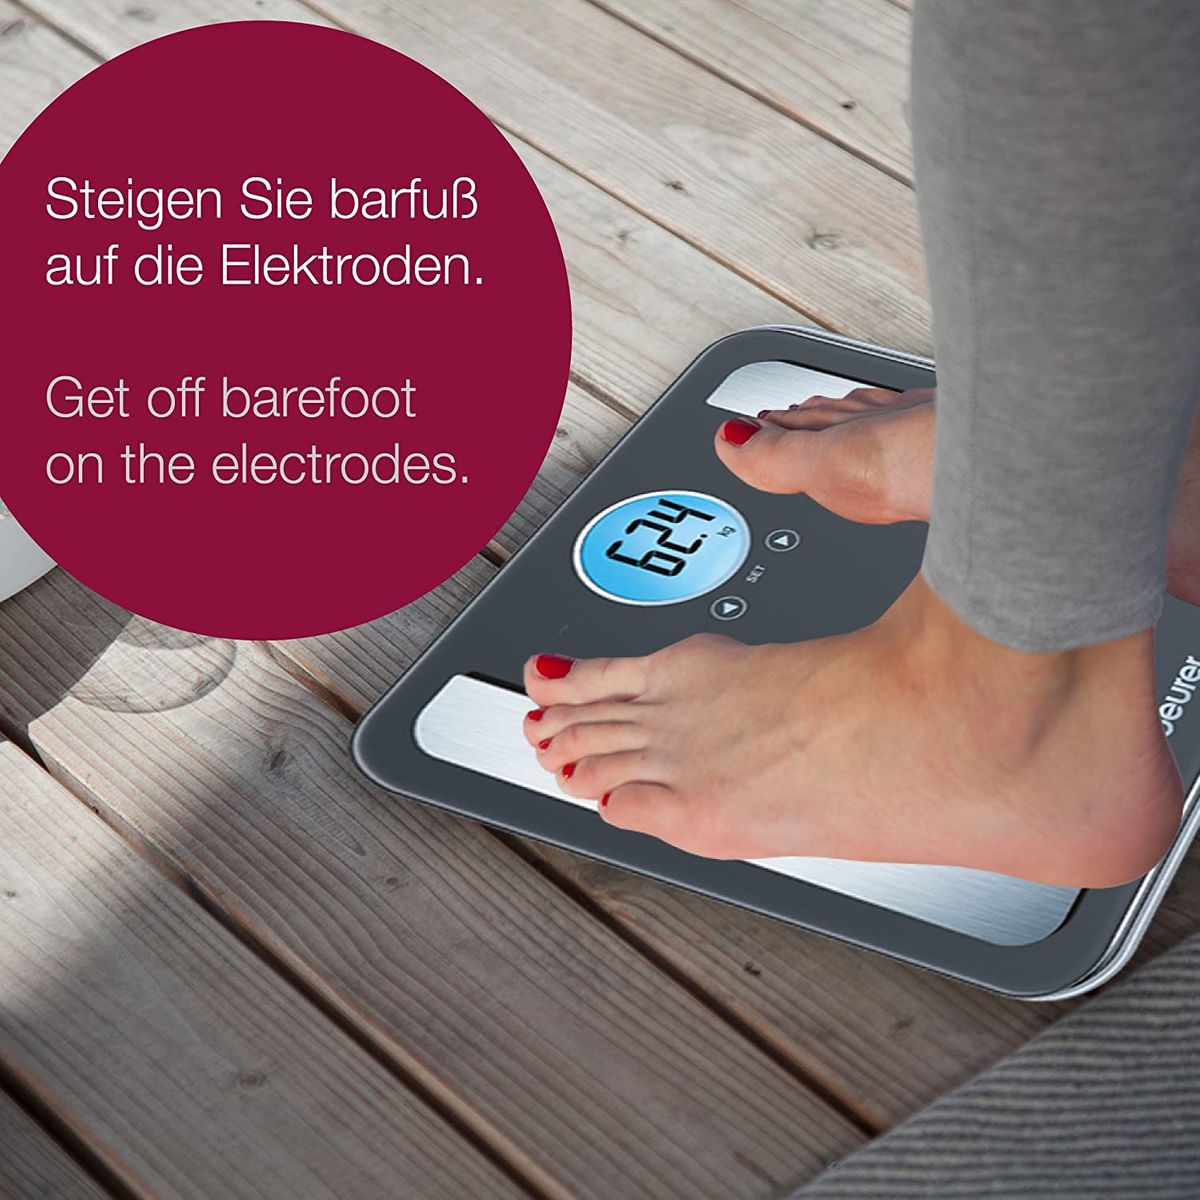 Beurer BF 195 glass diagnostic / personal scale, to determine body fat, muscle percentage and calorie requirements.